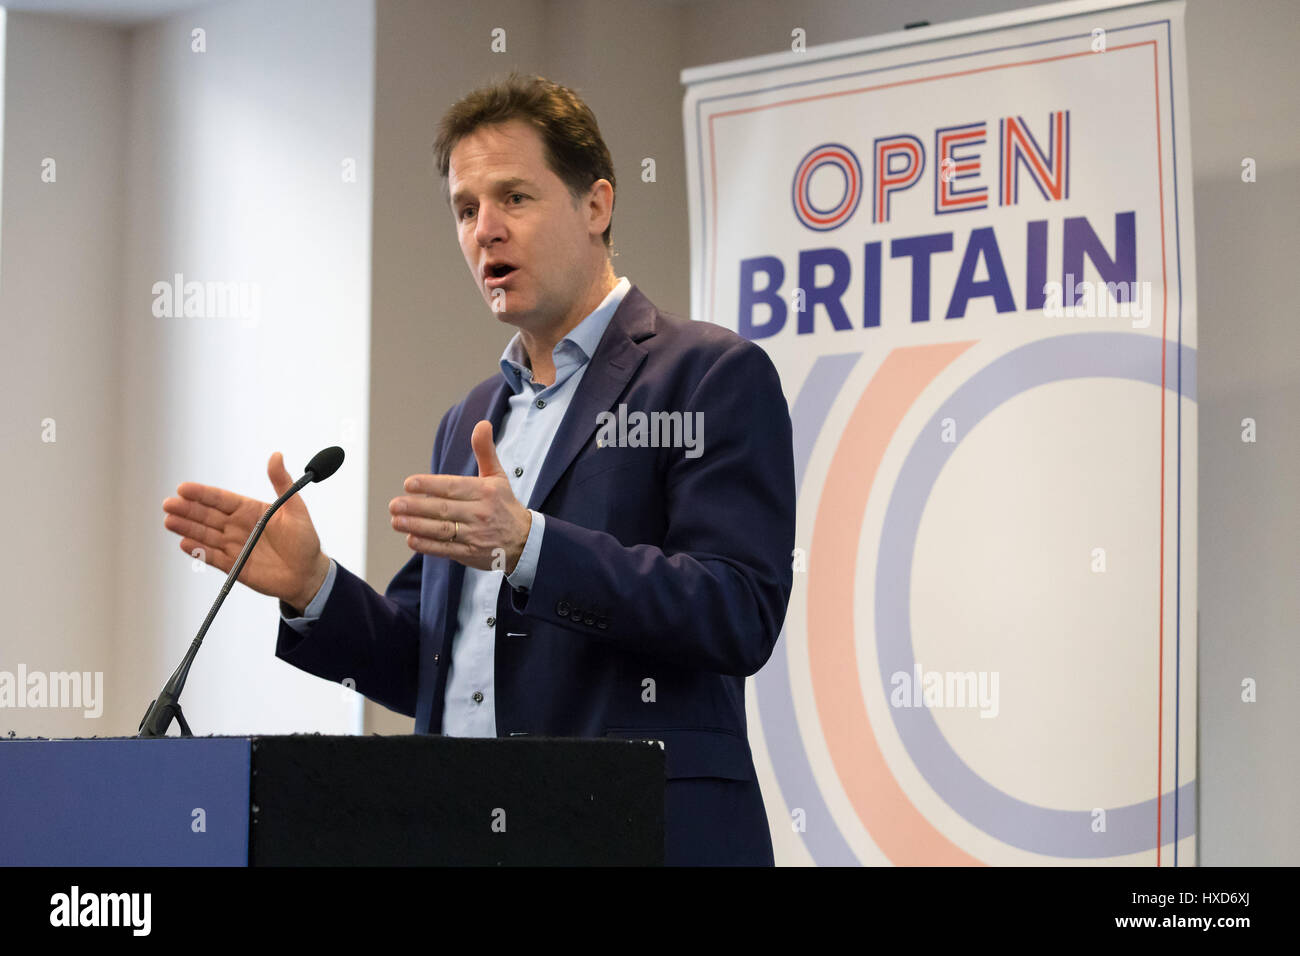 London, UK. 28th March 2017. Nick Clegg speaking at the Open Britain press conference. Leading supporters of the Open Britain campaign, Nicky Morgan MP, Chris Leslie MP and Nick Clegg MP hosted a press conference in which they answered questions about the Open Britain campaign’s publication: The Government’s Brexit Contract with the British people. Credit: Vickie Flores/Alamy Live News Stock Photo